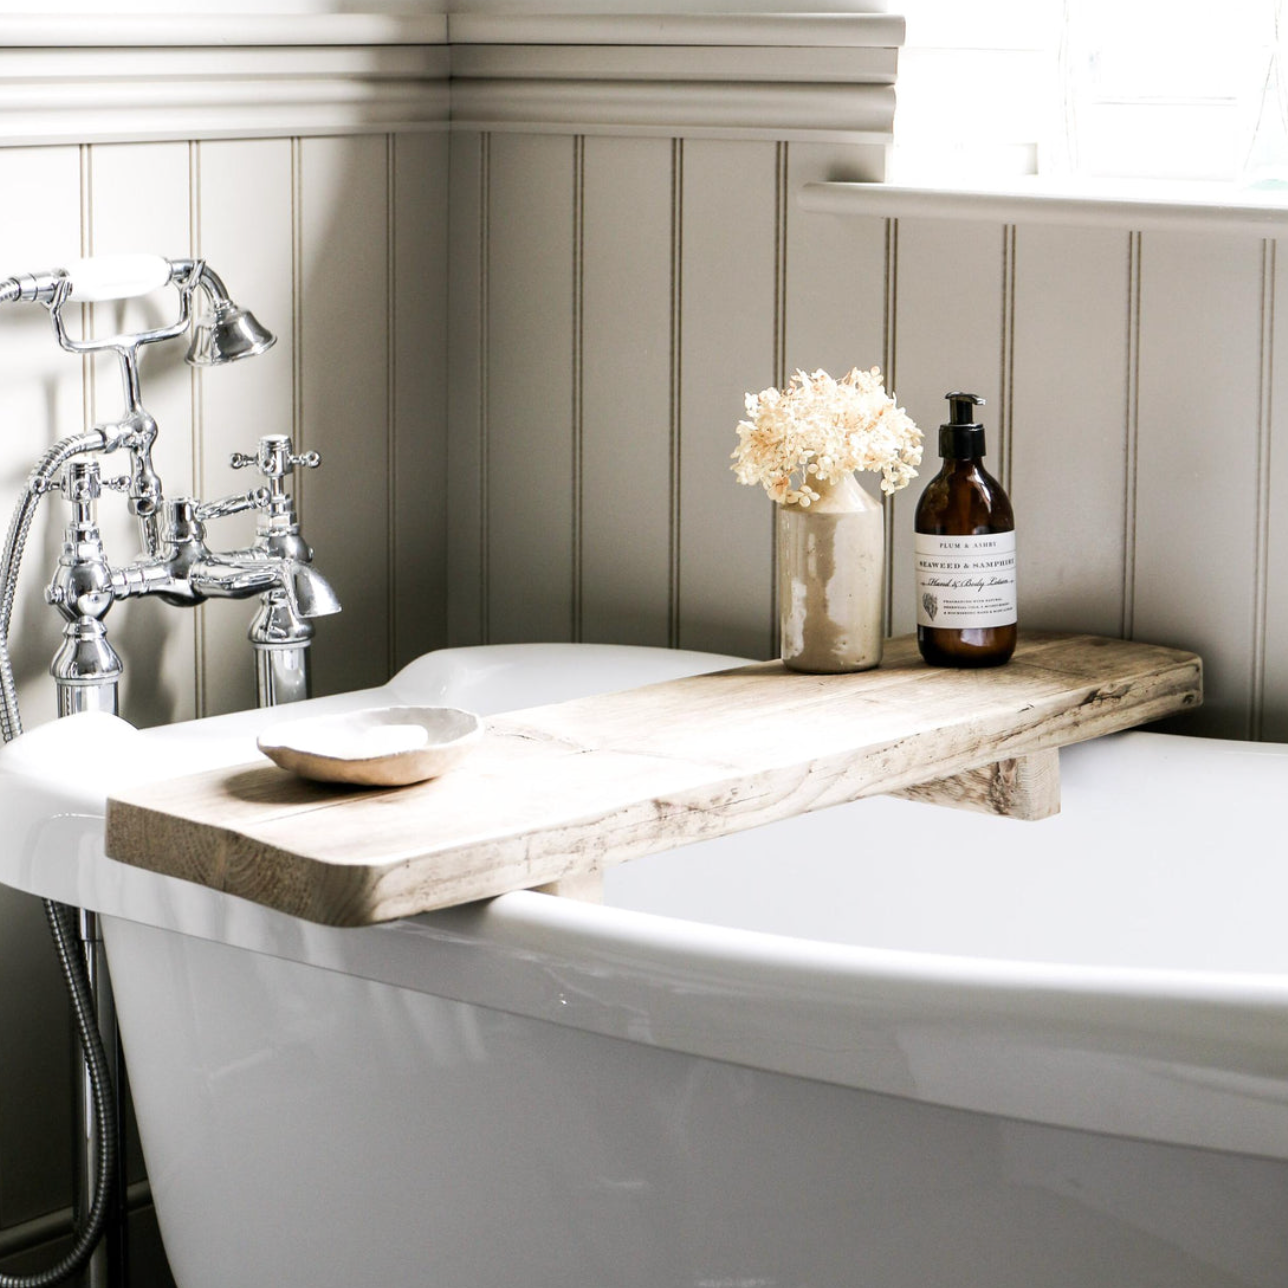 A chunky reclaimed bath board with a soap bottle and small vase with dried flowers in a bathroom.